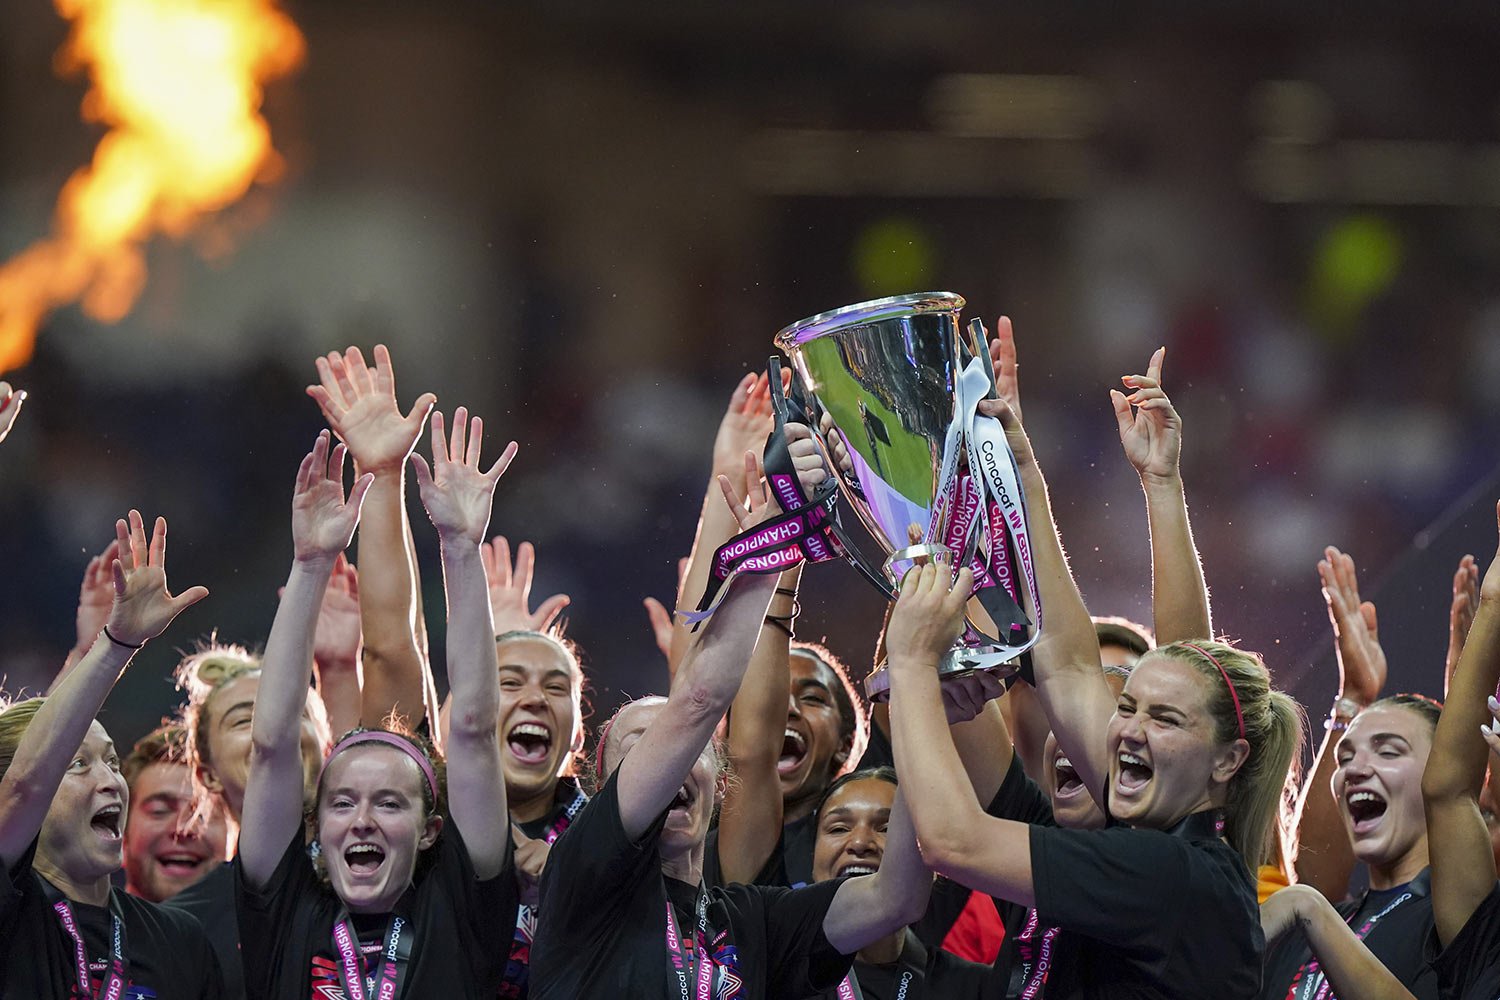 United States' players hold the trophy as they celebrate winning the CONCACAF Women's Championship final soccer match against Canada in Monterrey, Mexico, Monday, July 18, 2022. (AP Photo/Fernando Llano)